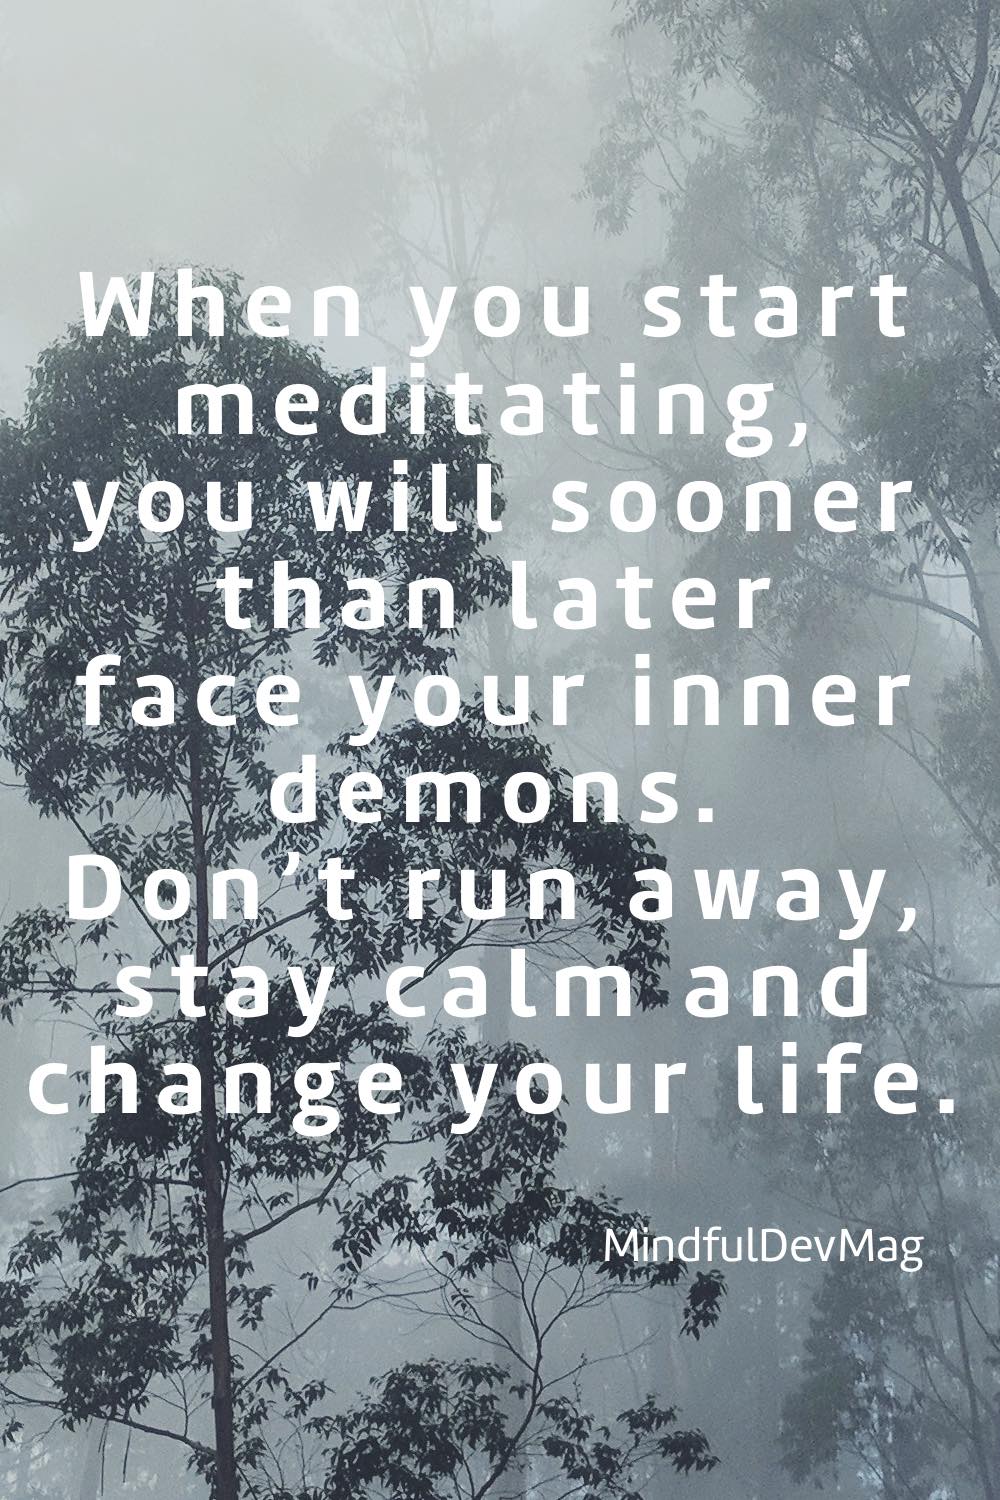 Mindful quote: When you start meditating,
you will sooner than later 
face your inner demons. 
Don’t run away, stay calm and change your life. - MindfuleDevMag